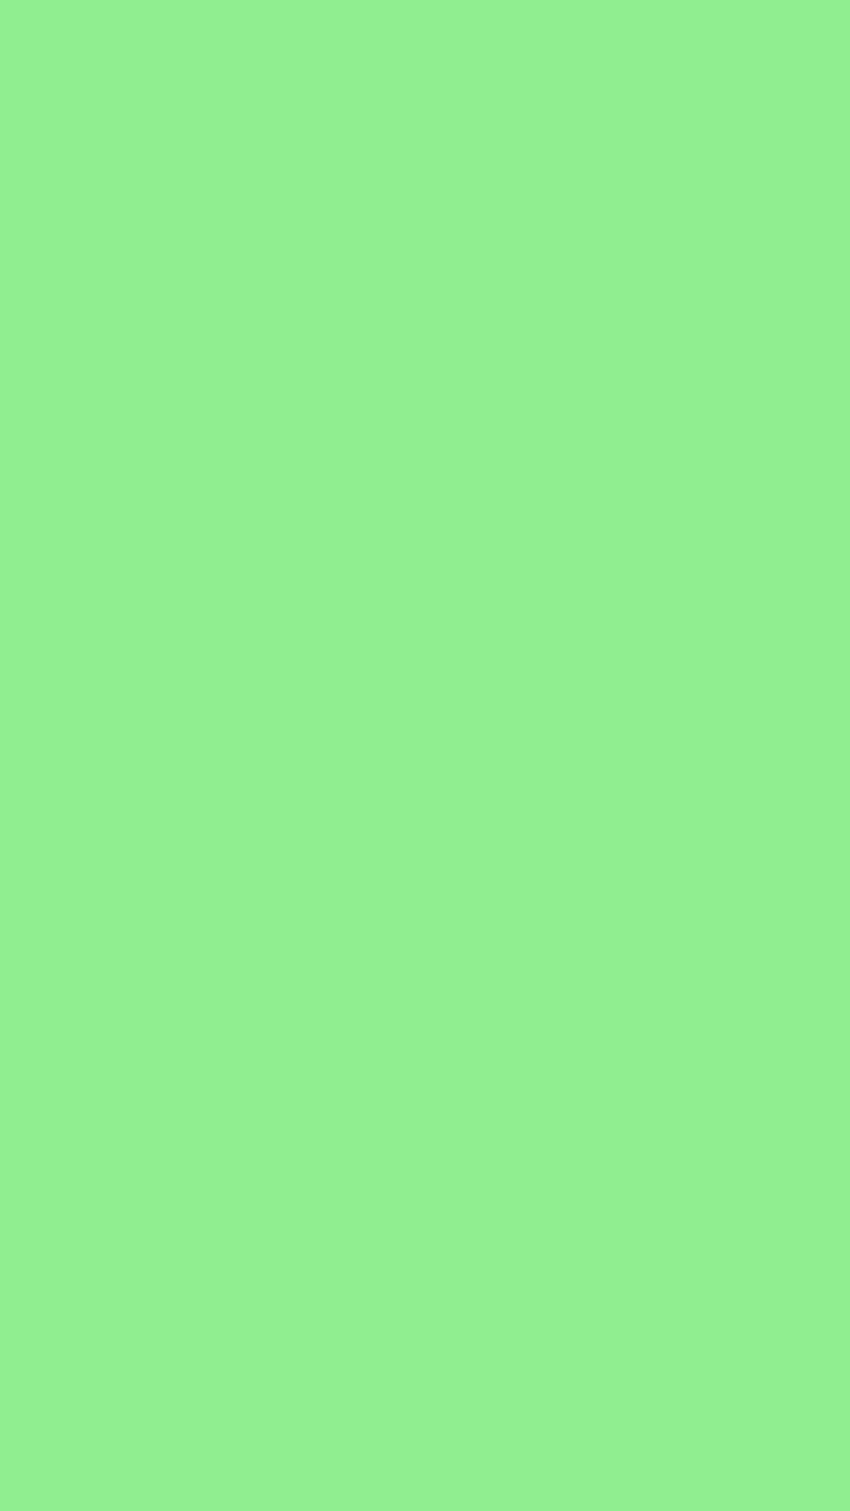 Light Green Solid Color Background for Mobile Phone, Plain Green HD phone wallpaper